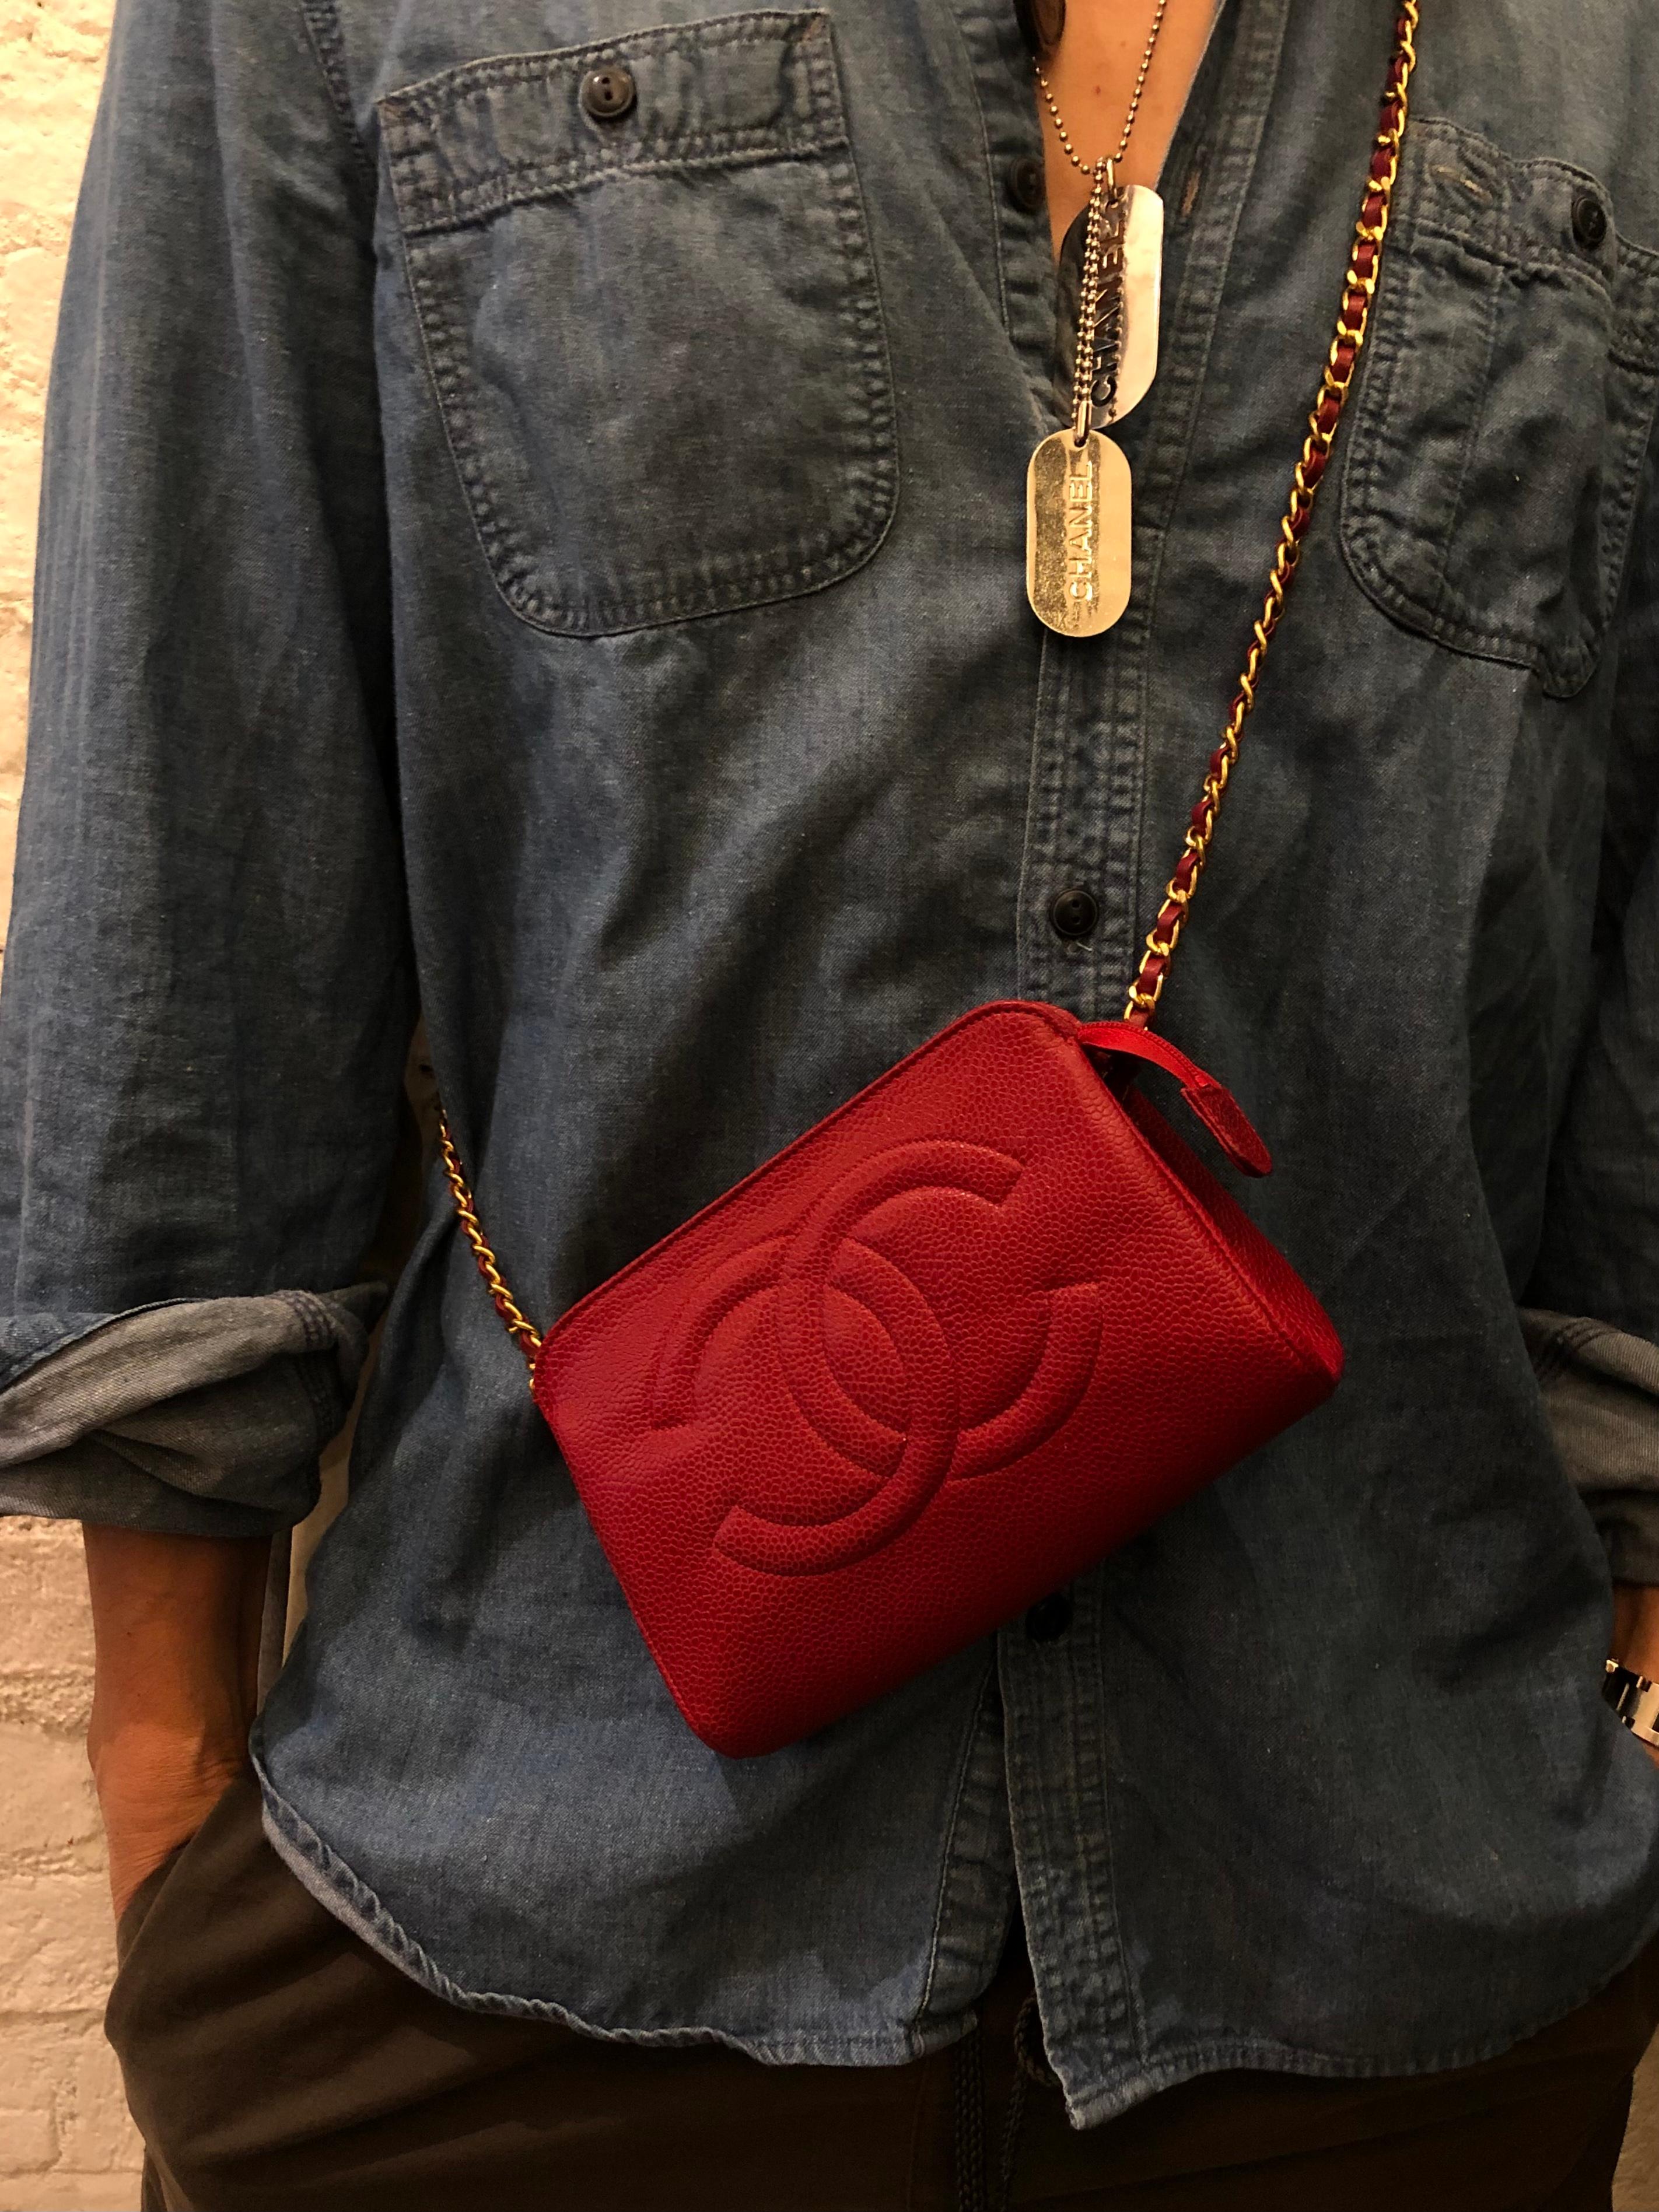 Women's or Men's RESERVED Vintage CHANEL Red Caviar Leather Pouch Bag Clutch (Altered)